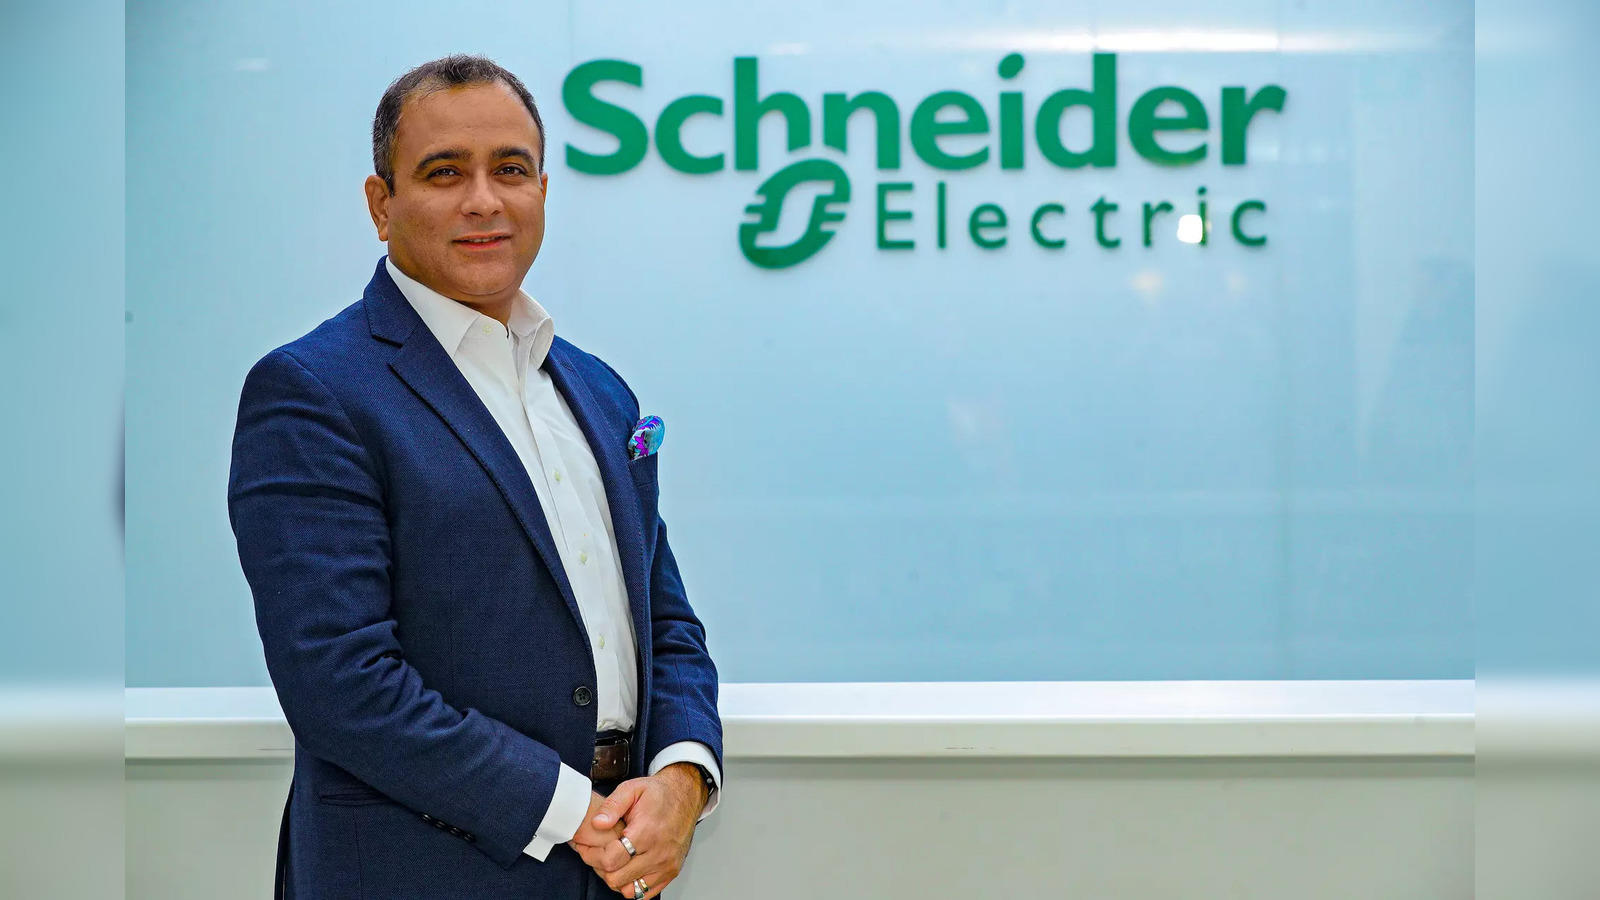 schneider electric india: Schneider Electric India lines up Rs